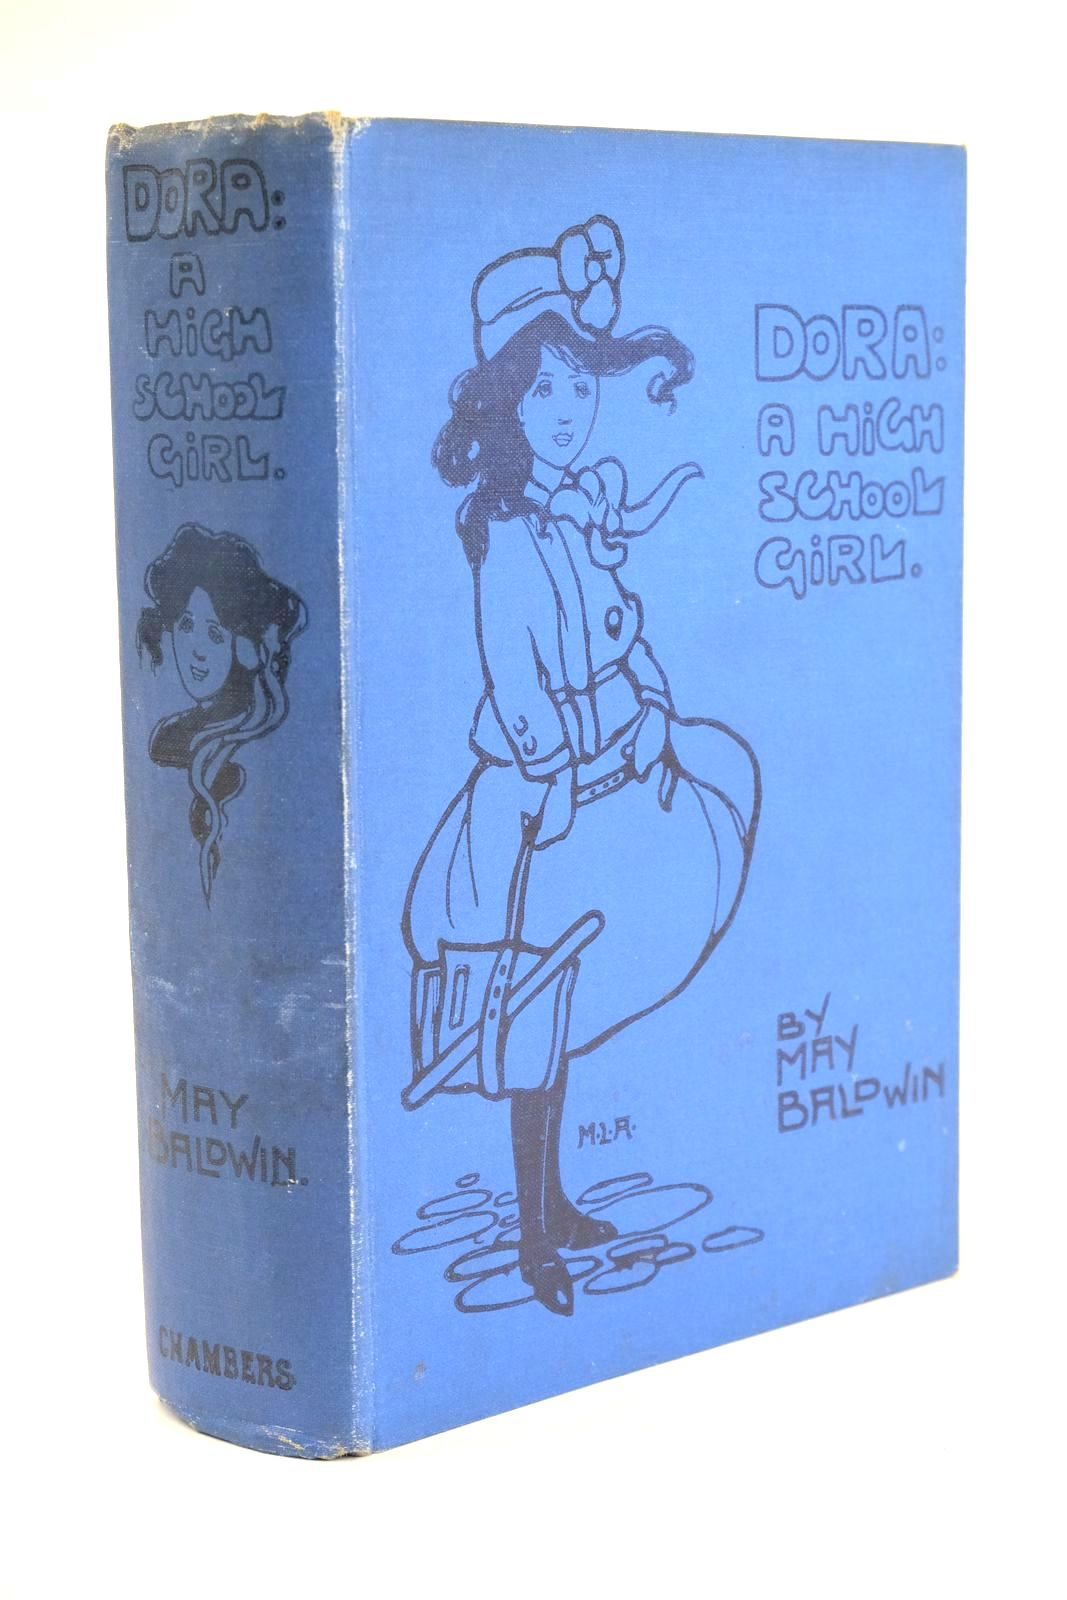 Photo of DORA: A HIGH SCHOOL GIRL written by Baldwin, May illustrated by Attwell, Mabel Lucie published by W. & R. Chambers Limited (STOCK CODE: 1324698)  for sale by Stella & Rose's Books